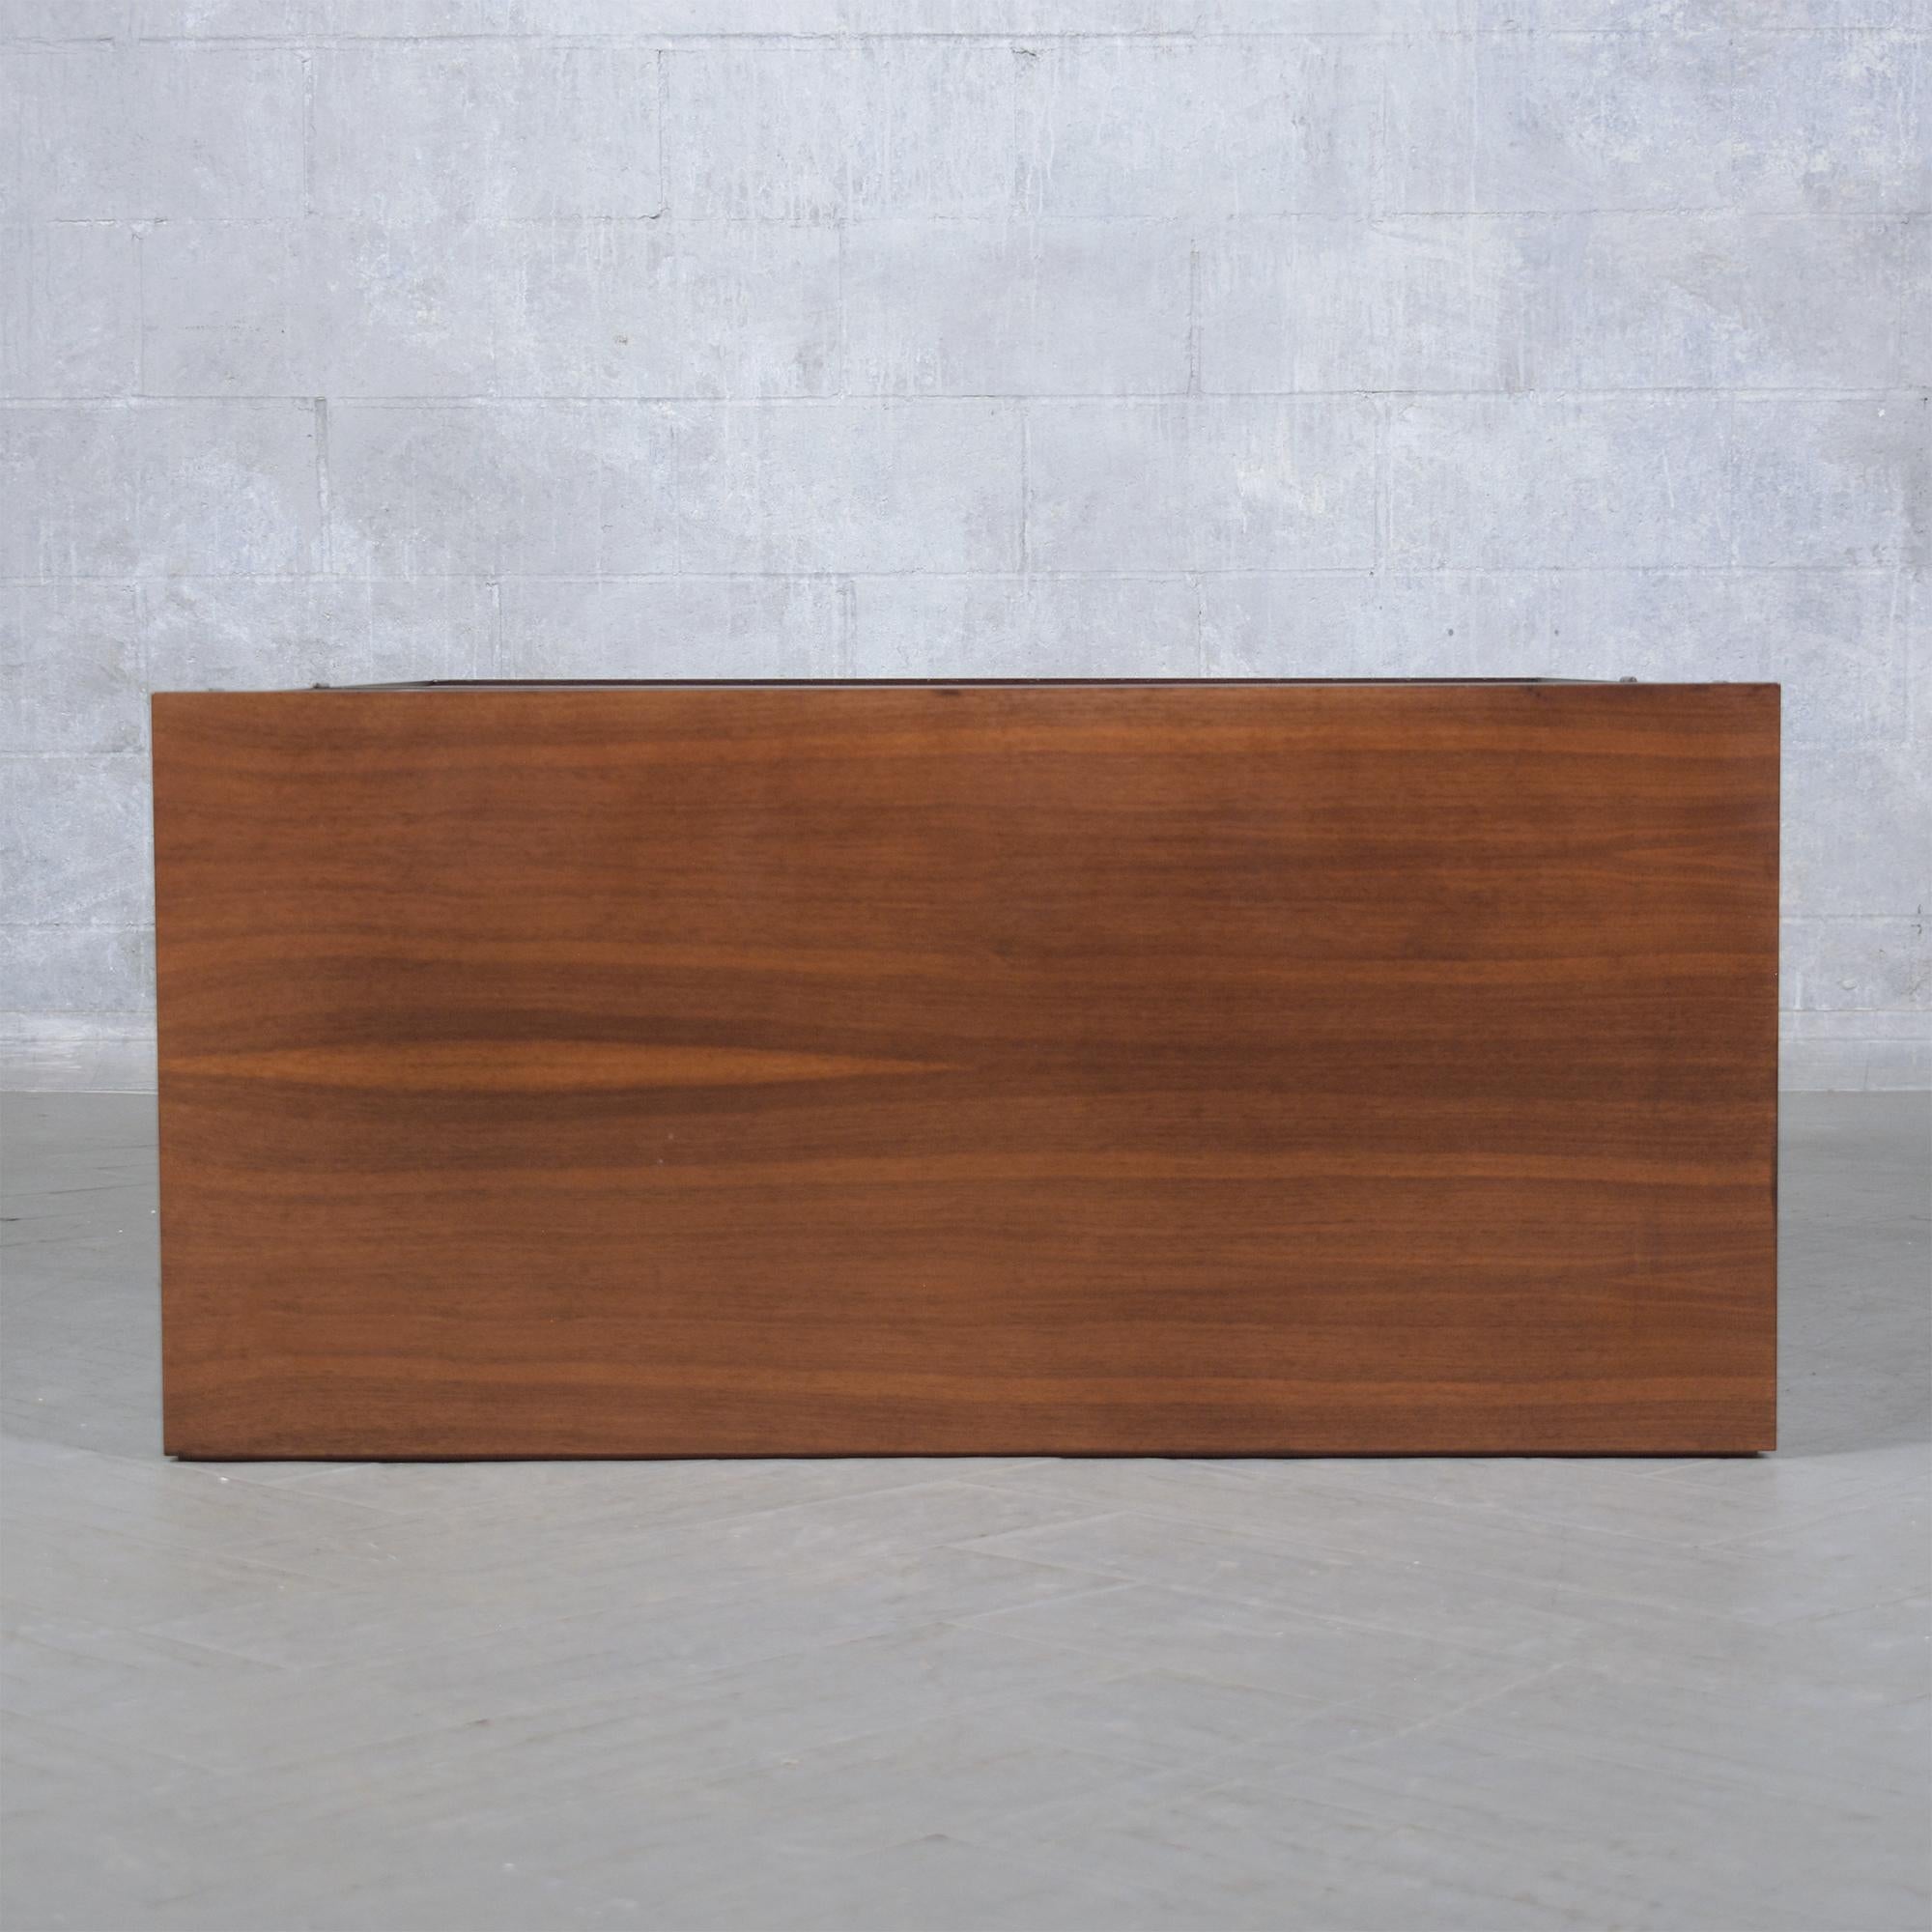 Restored 1960s Mid-Century Walnut Chest of Drawers with Sculpted Details For Sale 8